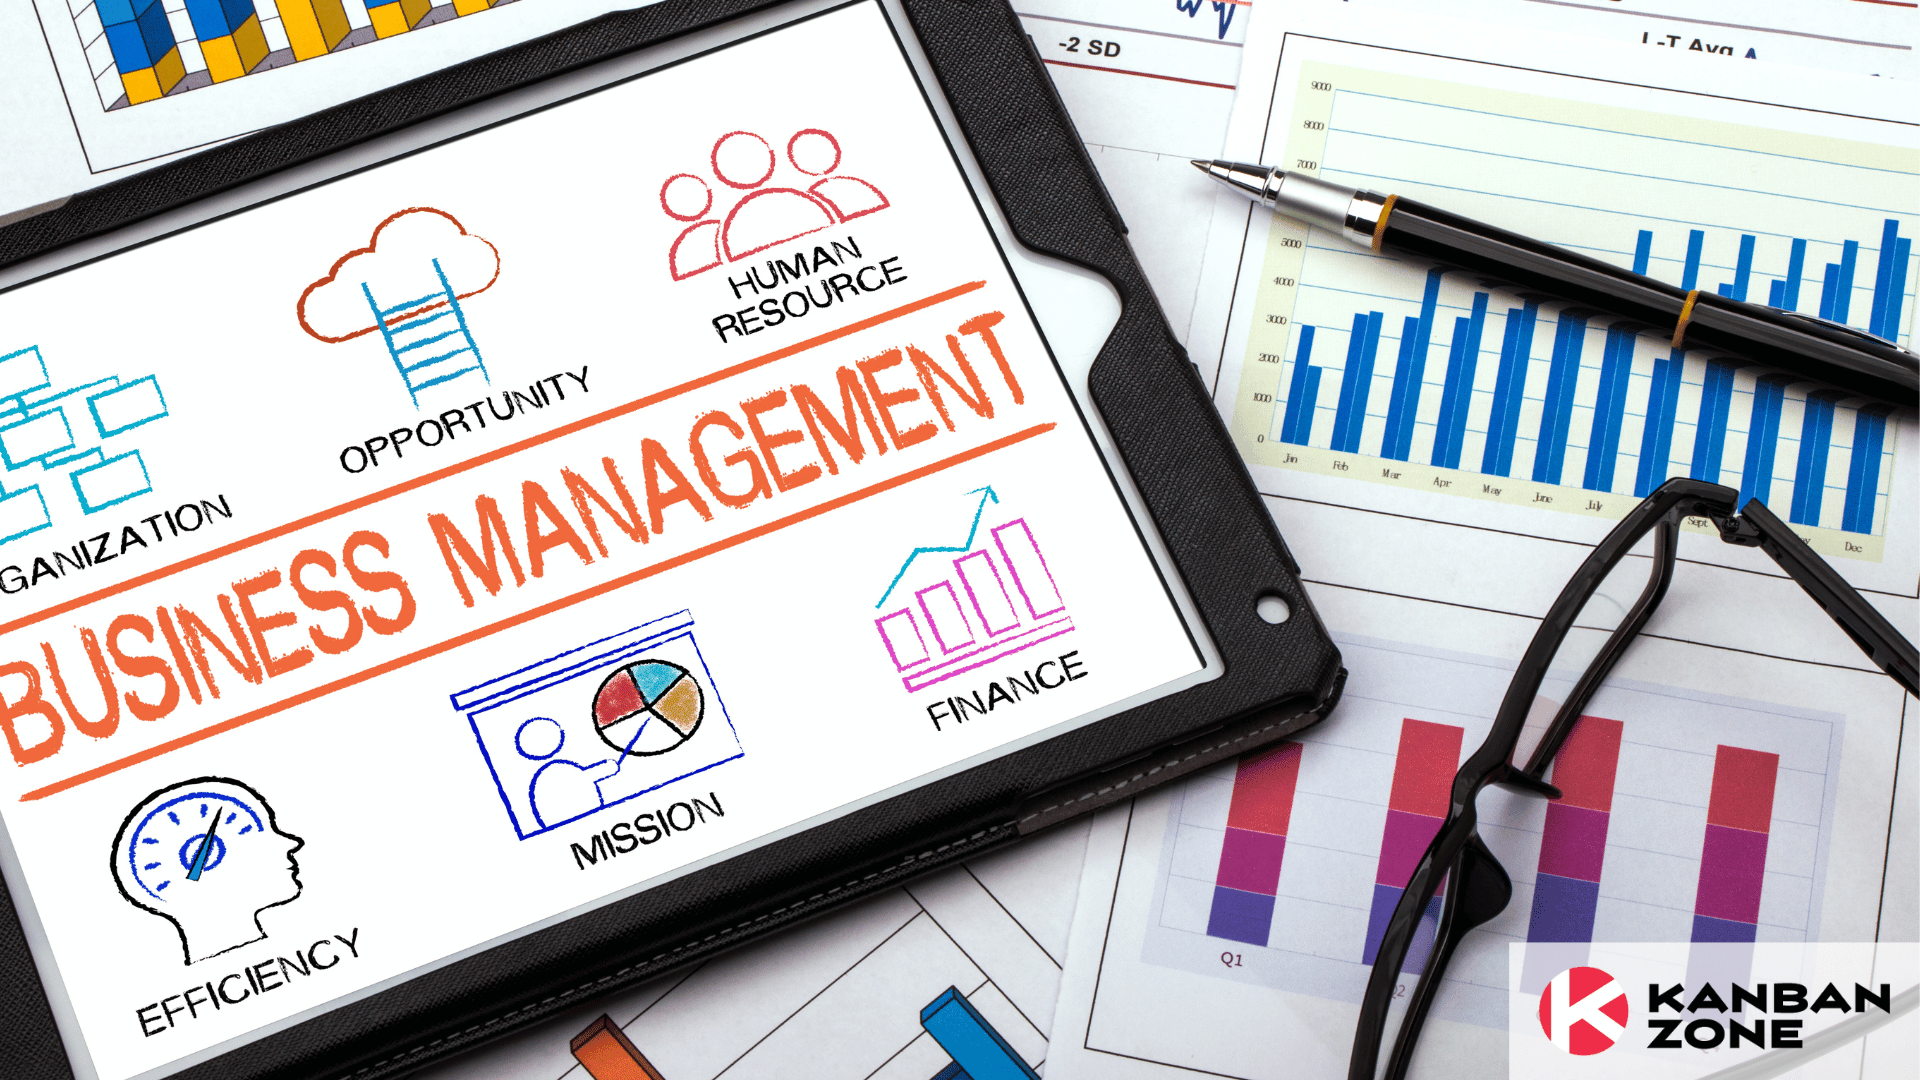 A Fresh Look at Business Management